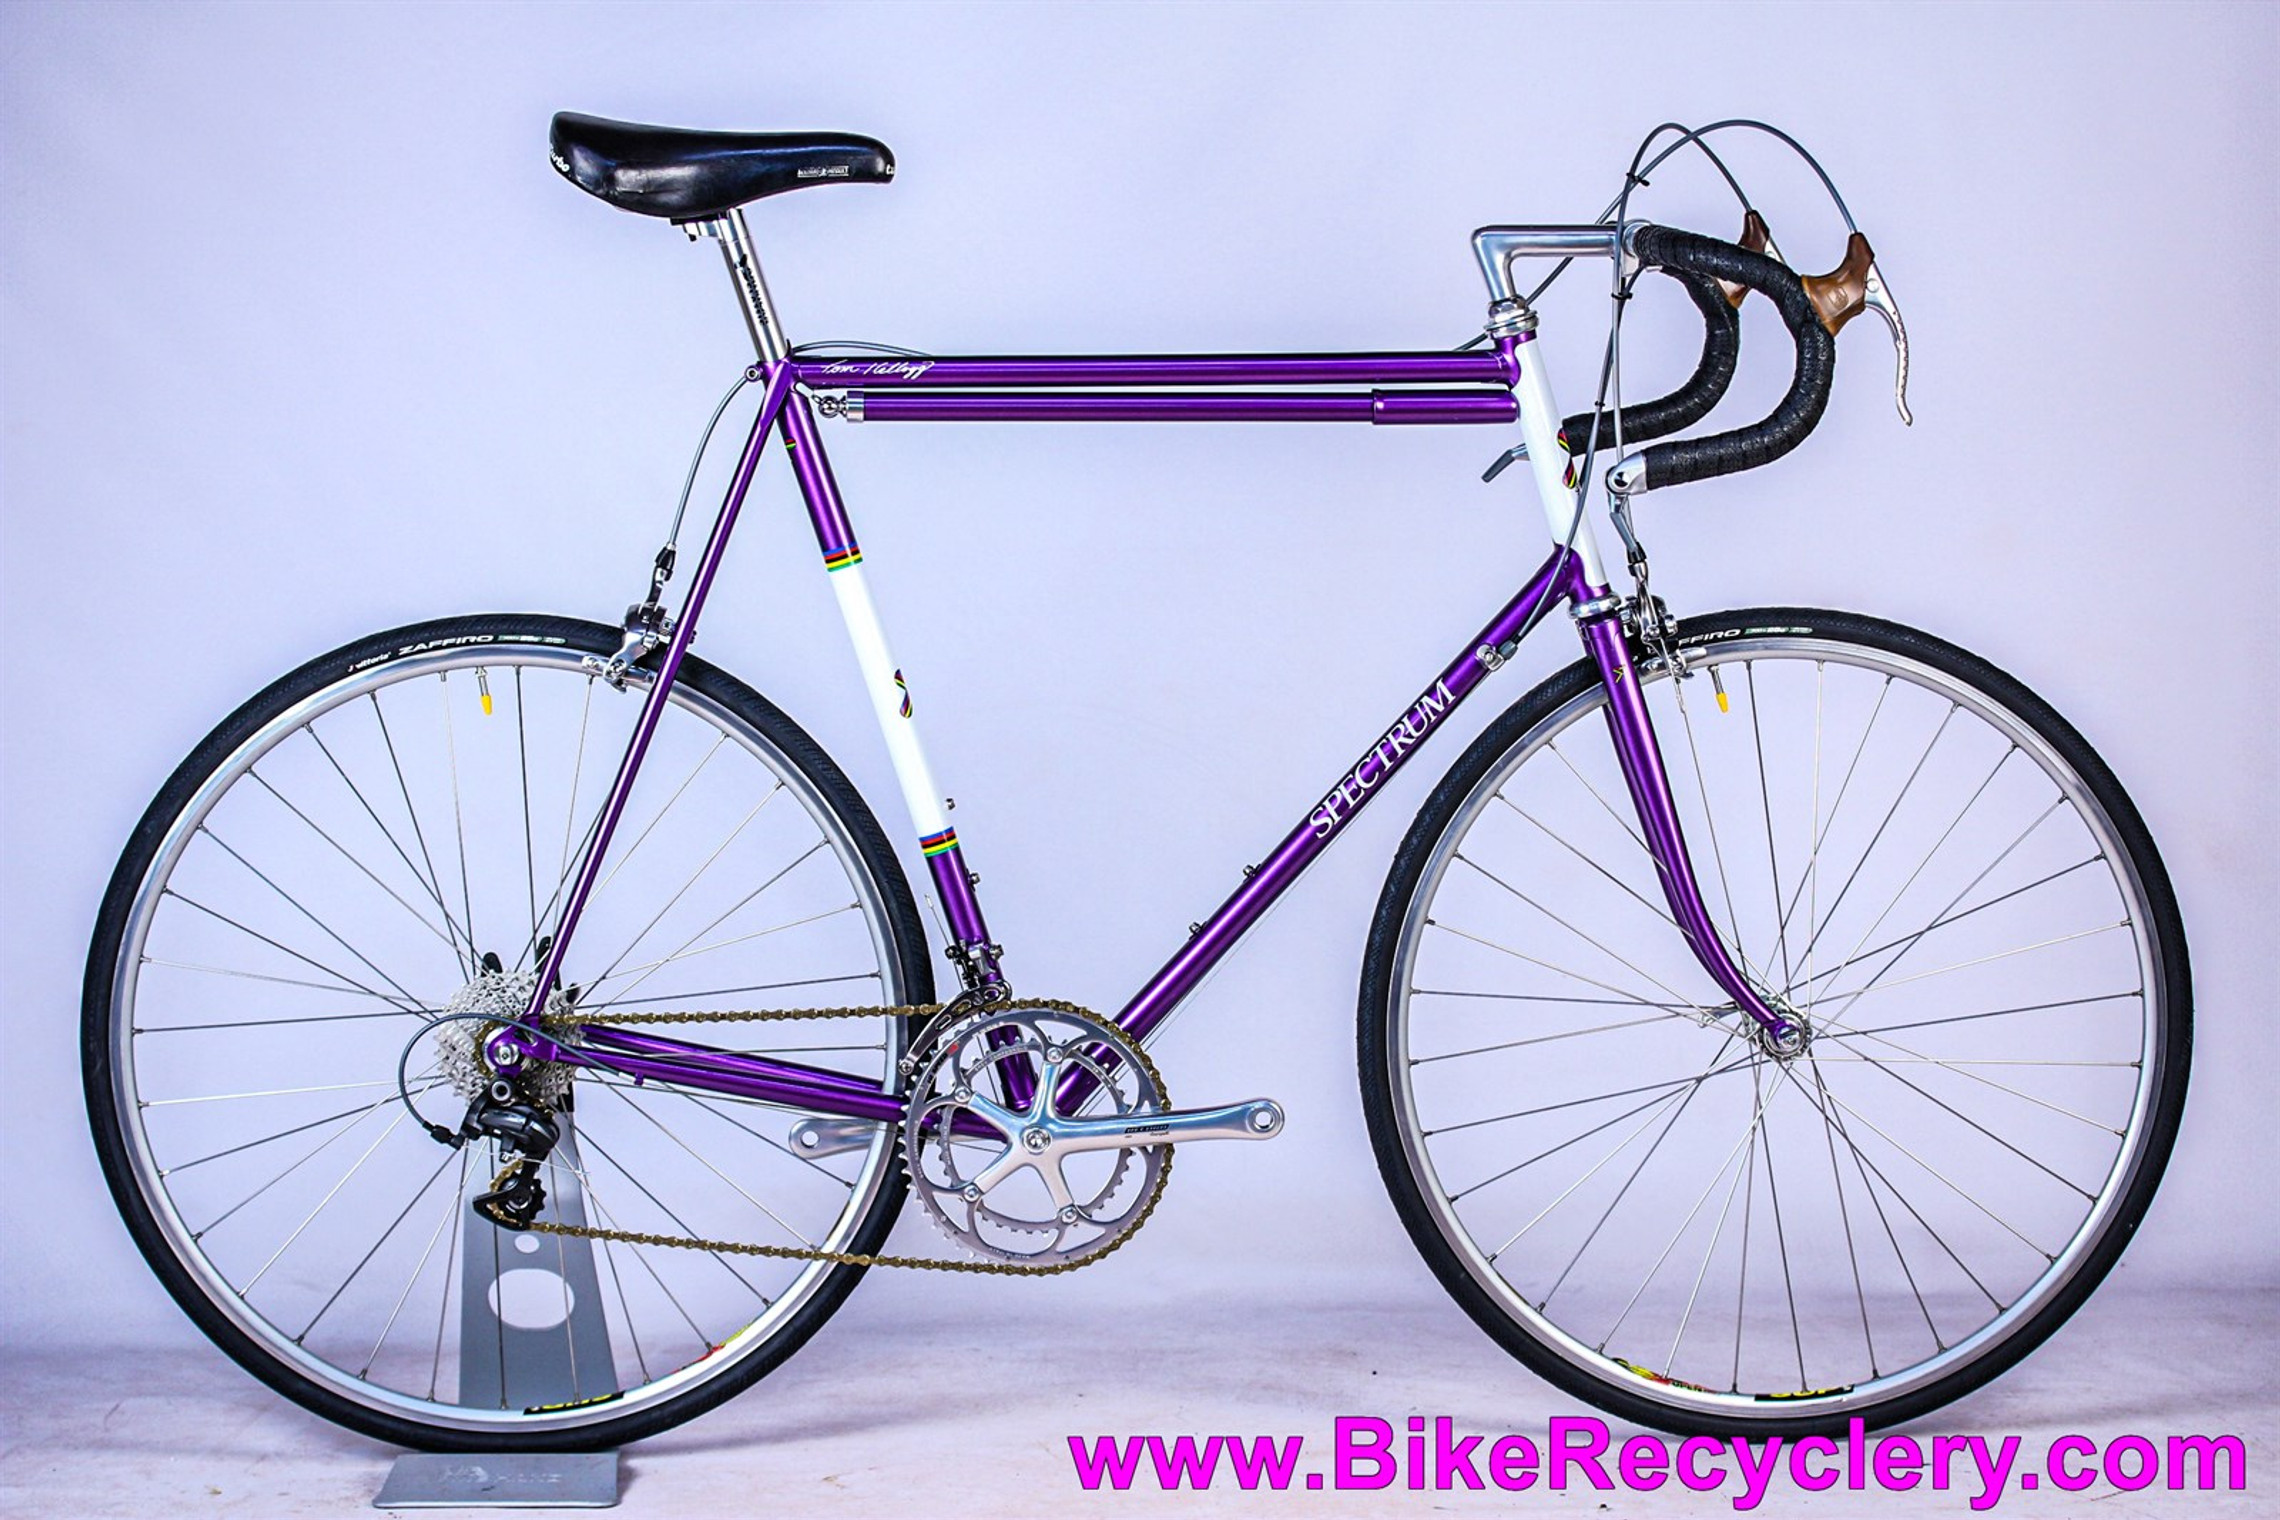 1992 Spectrum Cycles / Tom Kellogg Road Bike 64cm x 59cm - NEW Joe Bell Resto and NOS Parts - PURPLE and White - Record / DA 10sp - Henry James Dogbone 